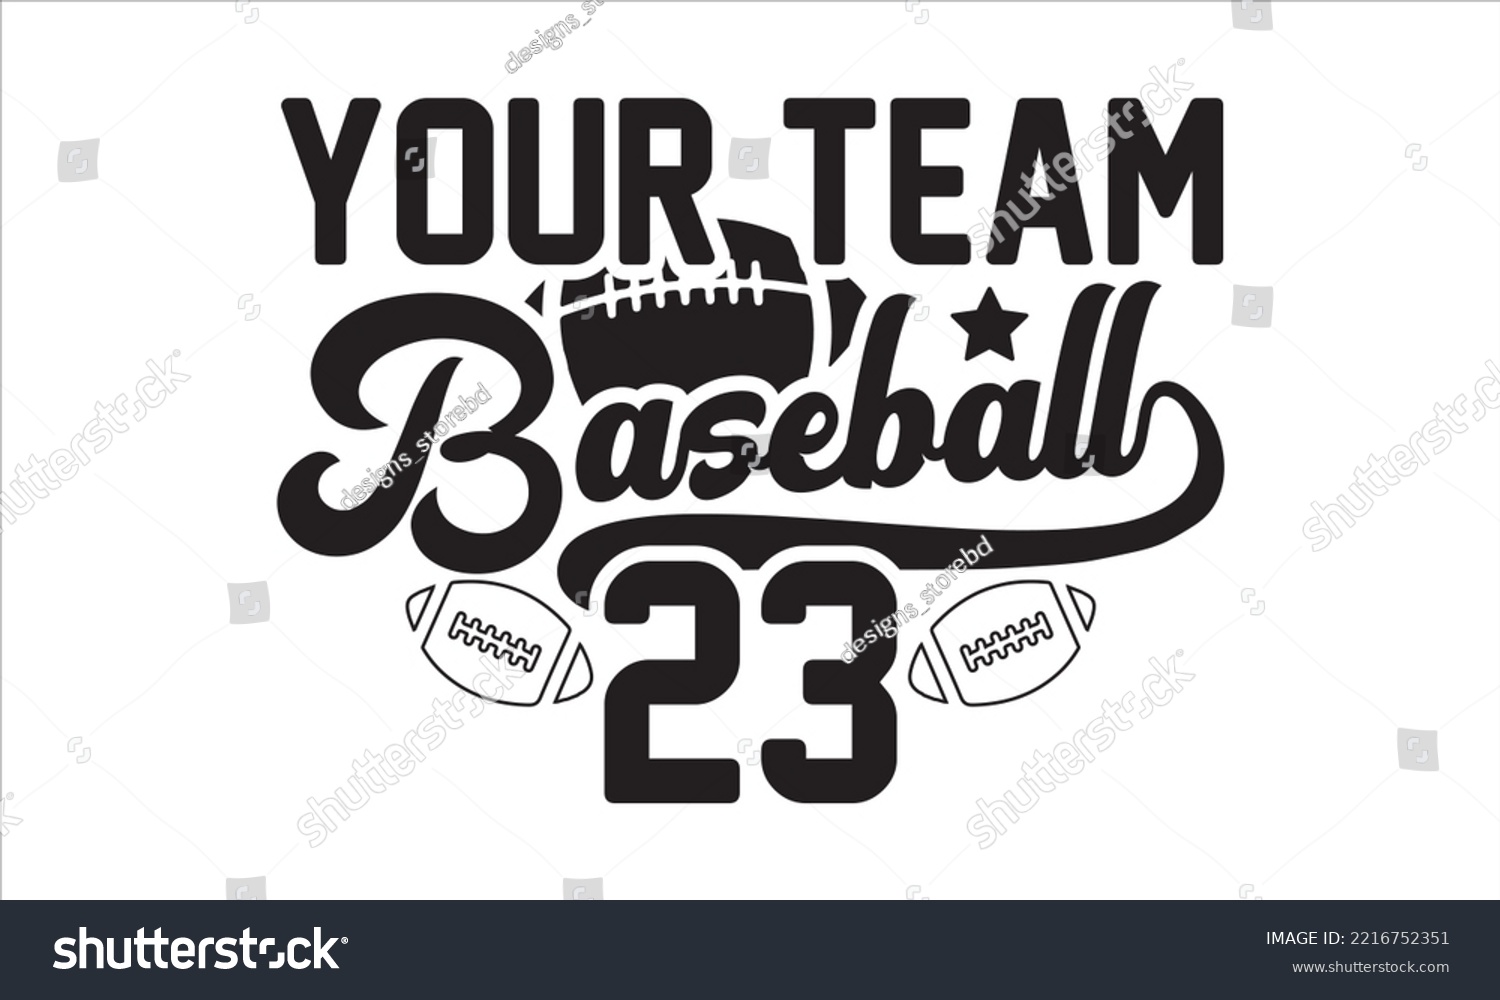 SVG of Your team Baseball 23 SVG,  baseball svg, baseball shirt, softball svg, softball mom life, Baseball svg bundle, Files for Cutting Typography Circuit and Silhouette, digital download Dxf, png svg